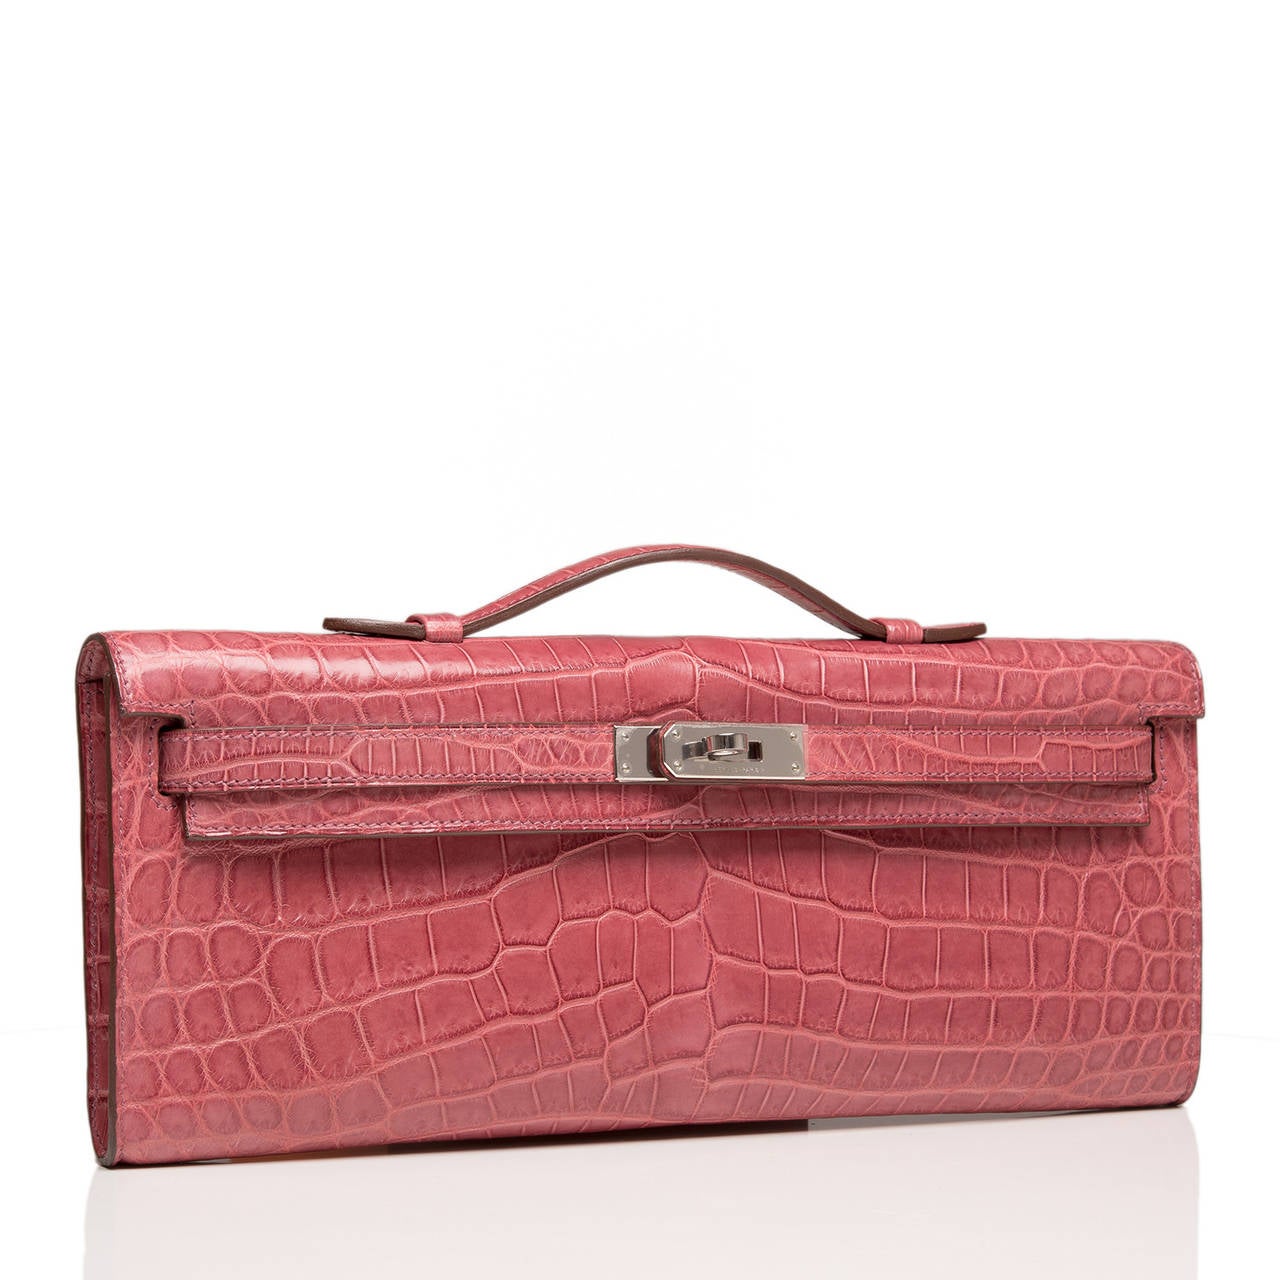 Hermes Bois de Rose matte niloticus crocodile Kelly Cut with palladium hardware.

This Kelly Cut in a gorgeous soft pink -- Bois de Rose -- is elegant with rare matte nilo crocodile skin and palladium hardware; the bag has tonal stitching, front